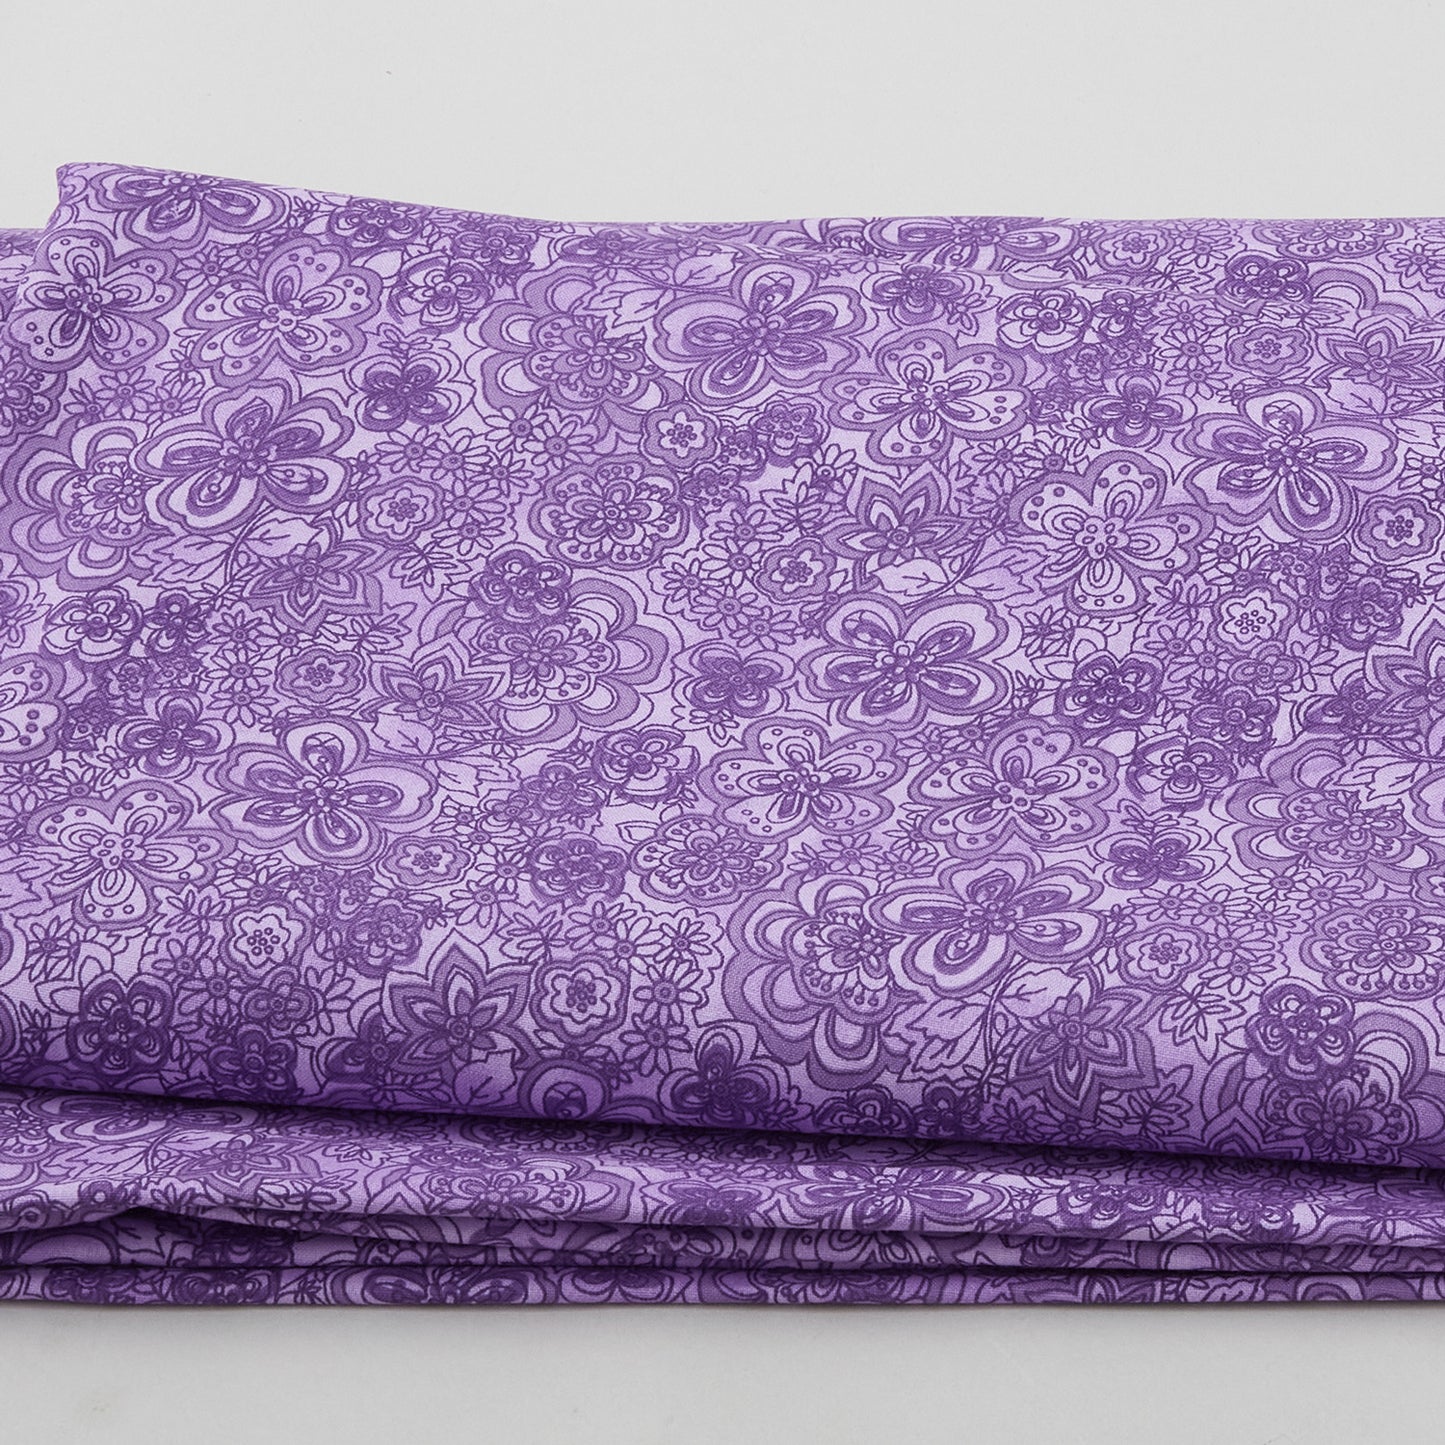 Isadora - Tonal Floral Lilac 108" Wide 3 Yard Cut Primary Image